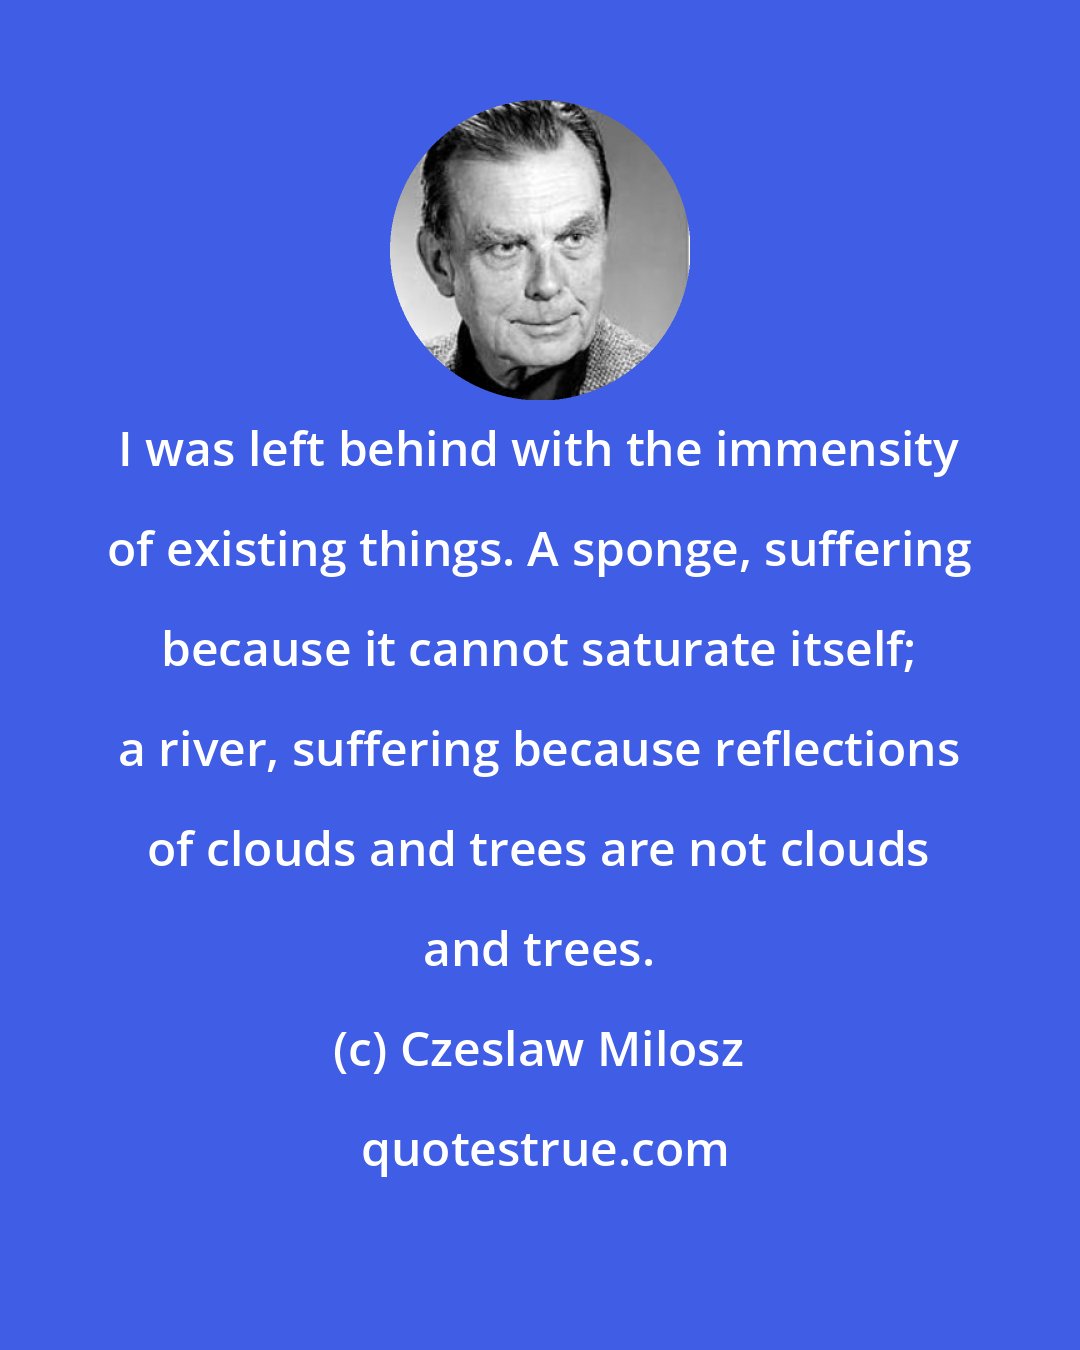 Czeslaw Milosz: I was left behind with the immensity of existing things. A sponge, suffering because it cannot saturate itself; a river, suffering because reflections of clouds and trees are not clouds and trees.